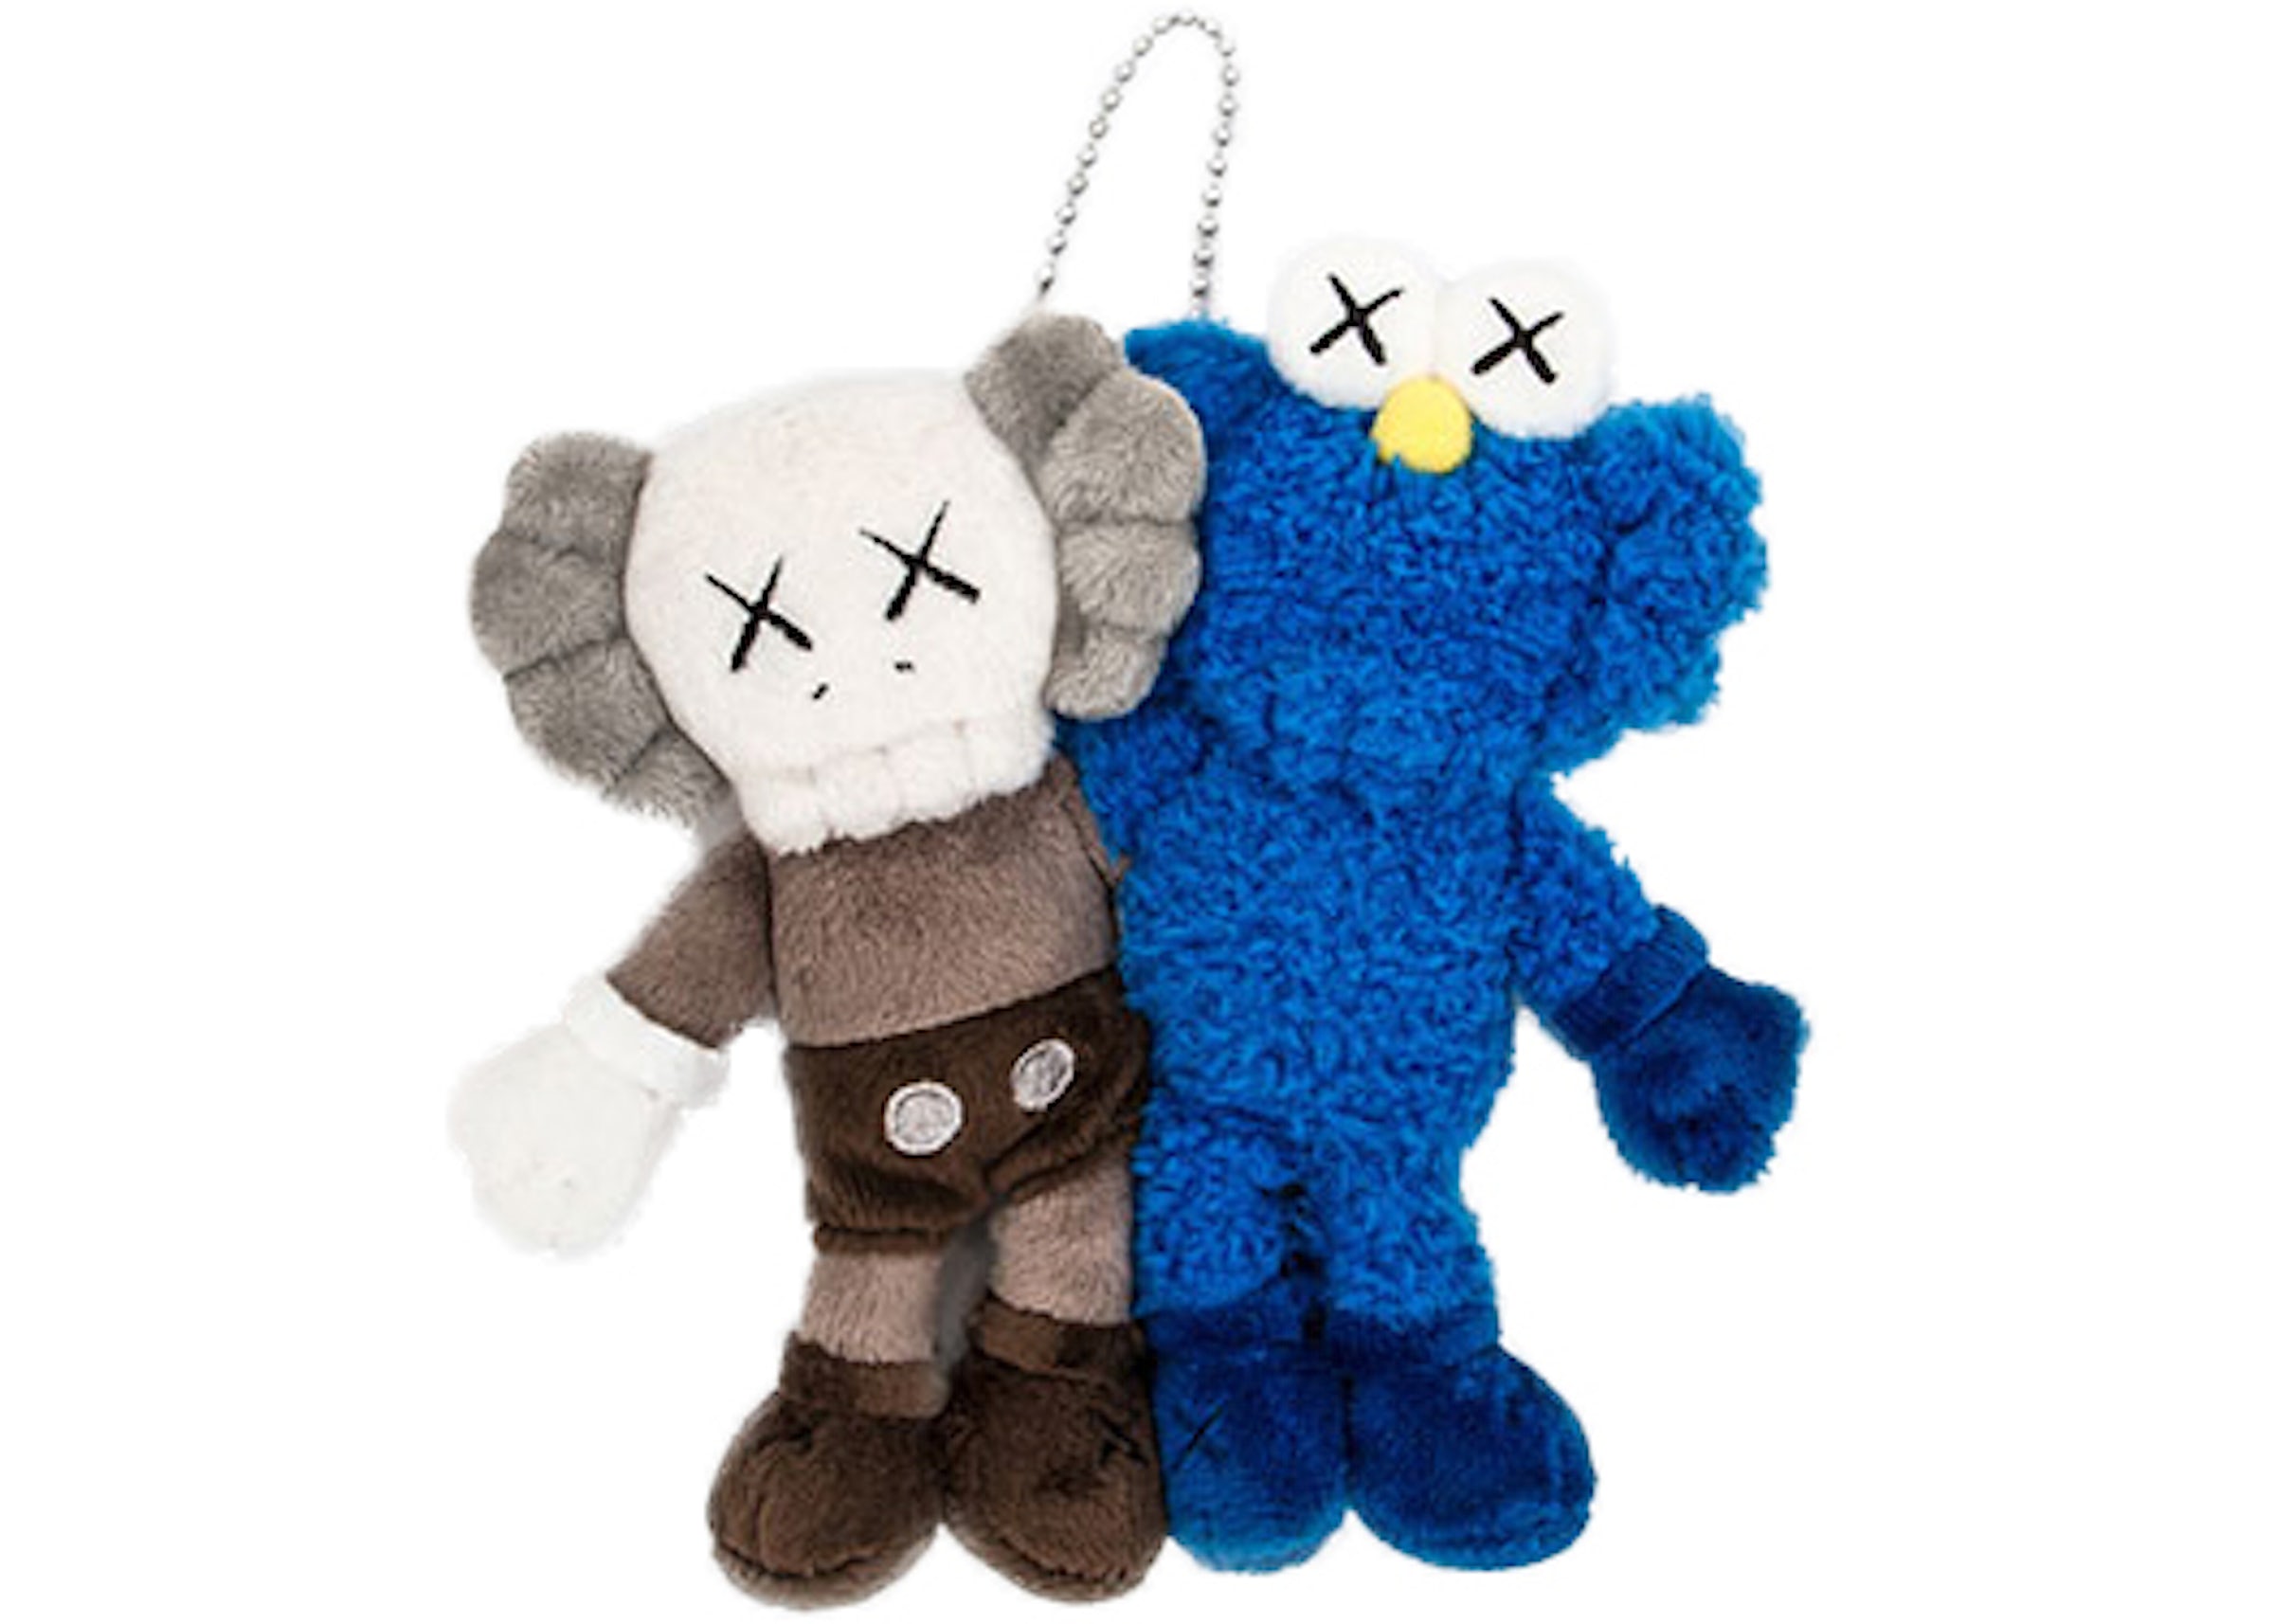 https://images.stockx.com/images/Kaws-Seeing-Watching-Plush-Doll-Keychain-Grey-Blue.jpg?fit=fill&bg=FFFFFF&w=1200&h=857&fm=jpg&auto=compress&dpr=2&trim=color&updated_at=1614778698&q=60